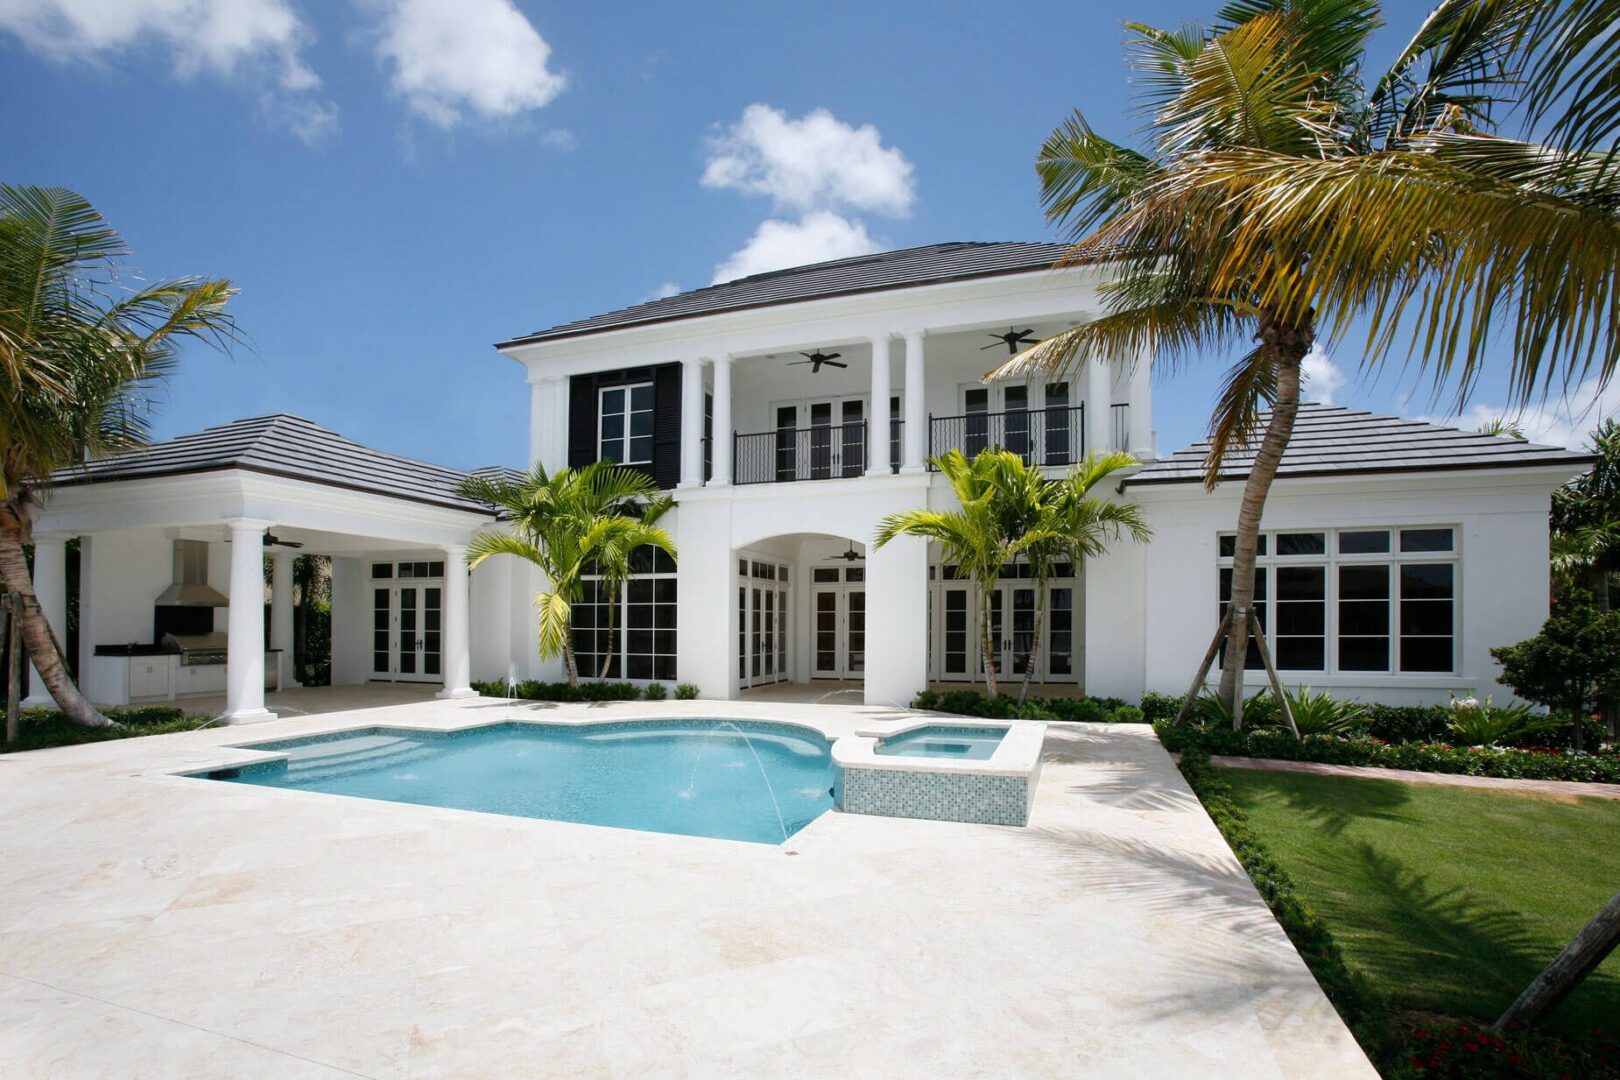 A large white house with pool and palm trees.